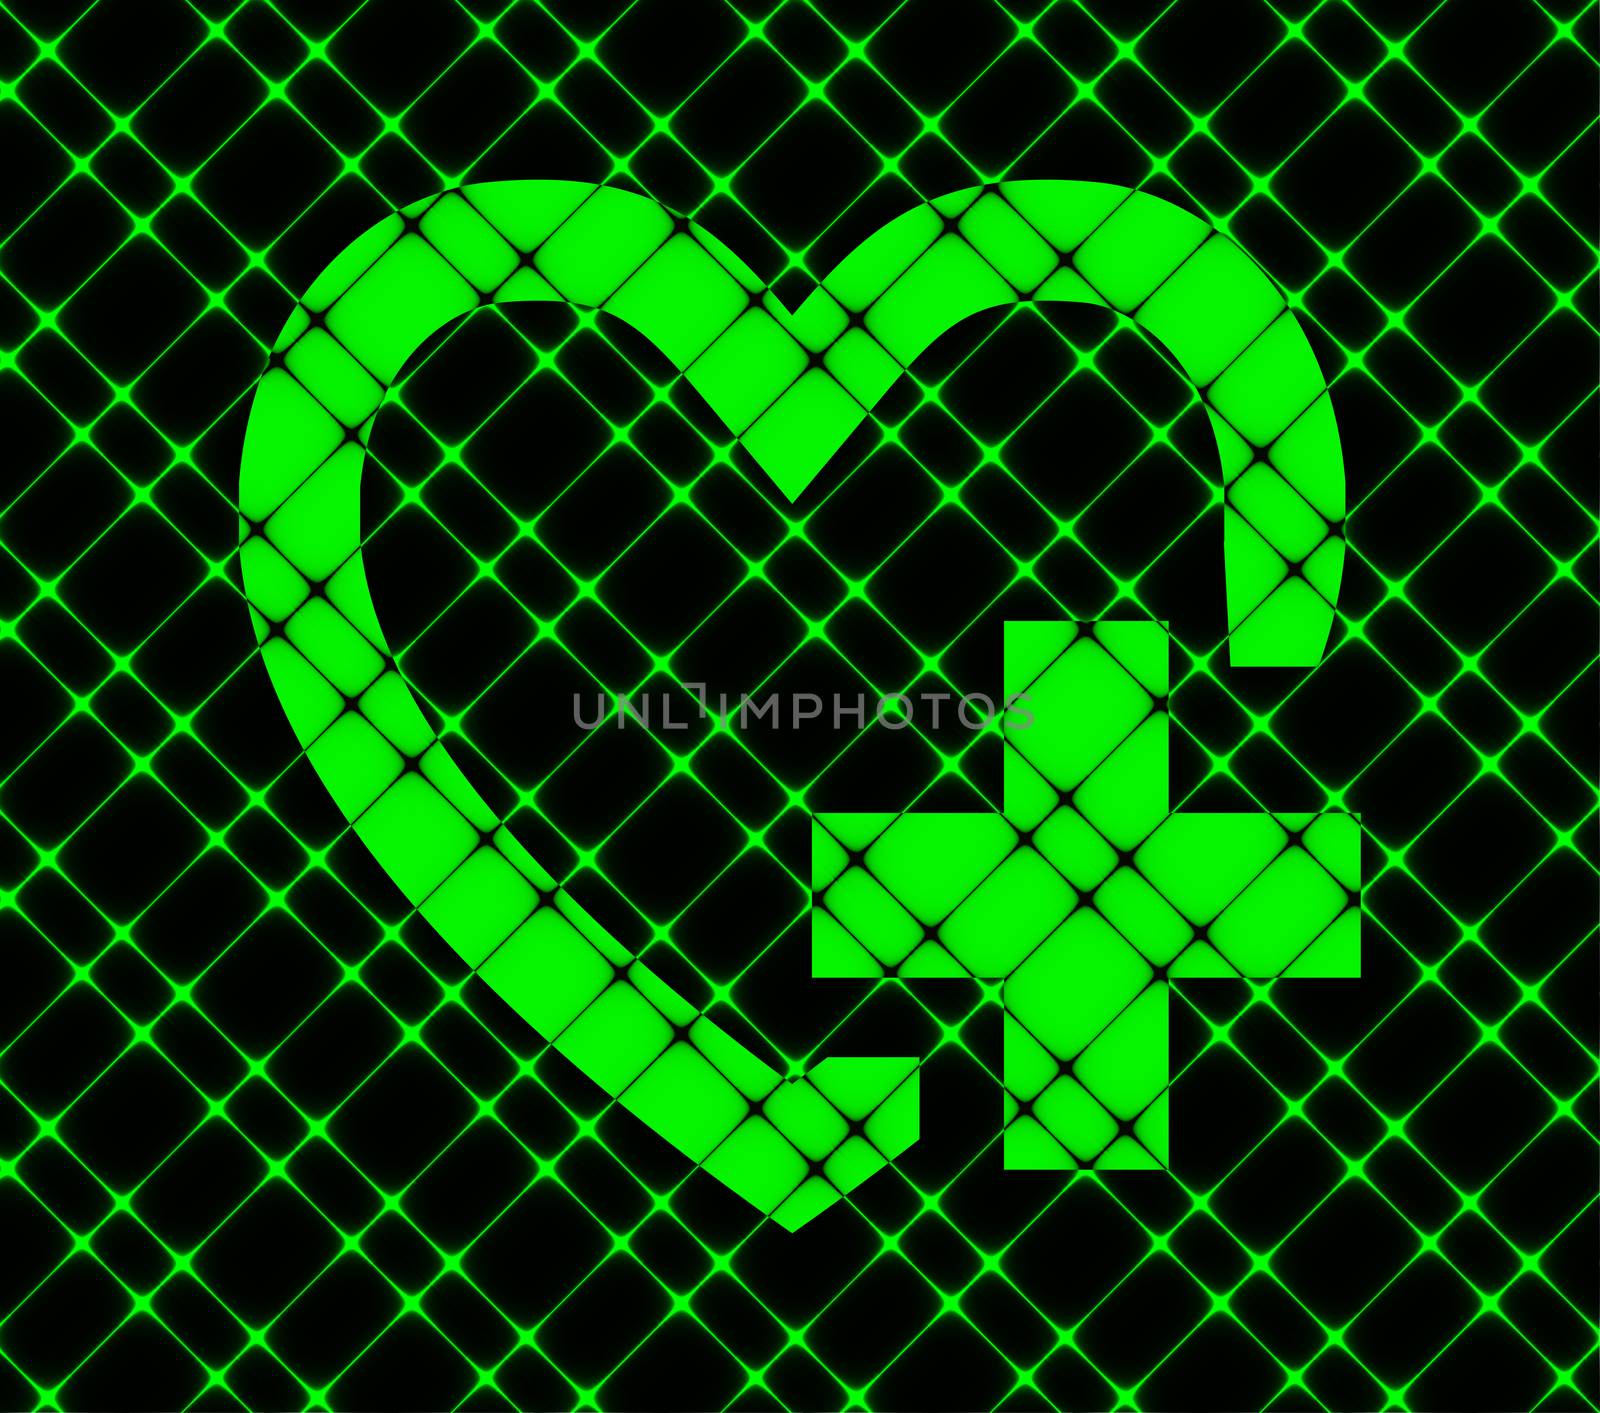 Heart icon Flat with abstract background.